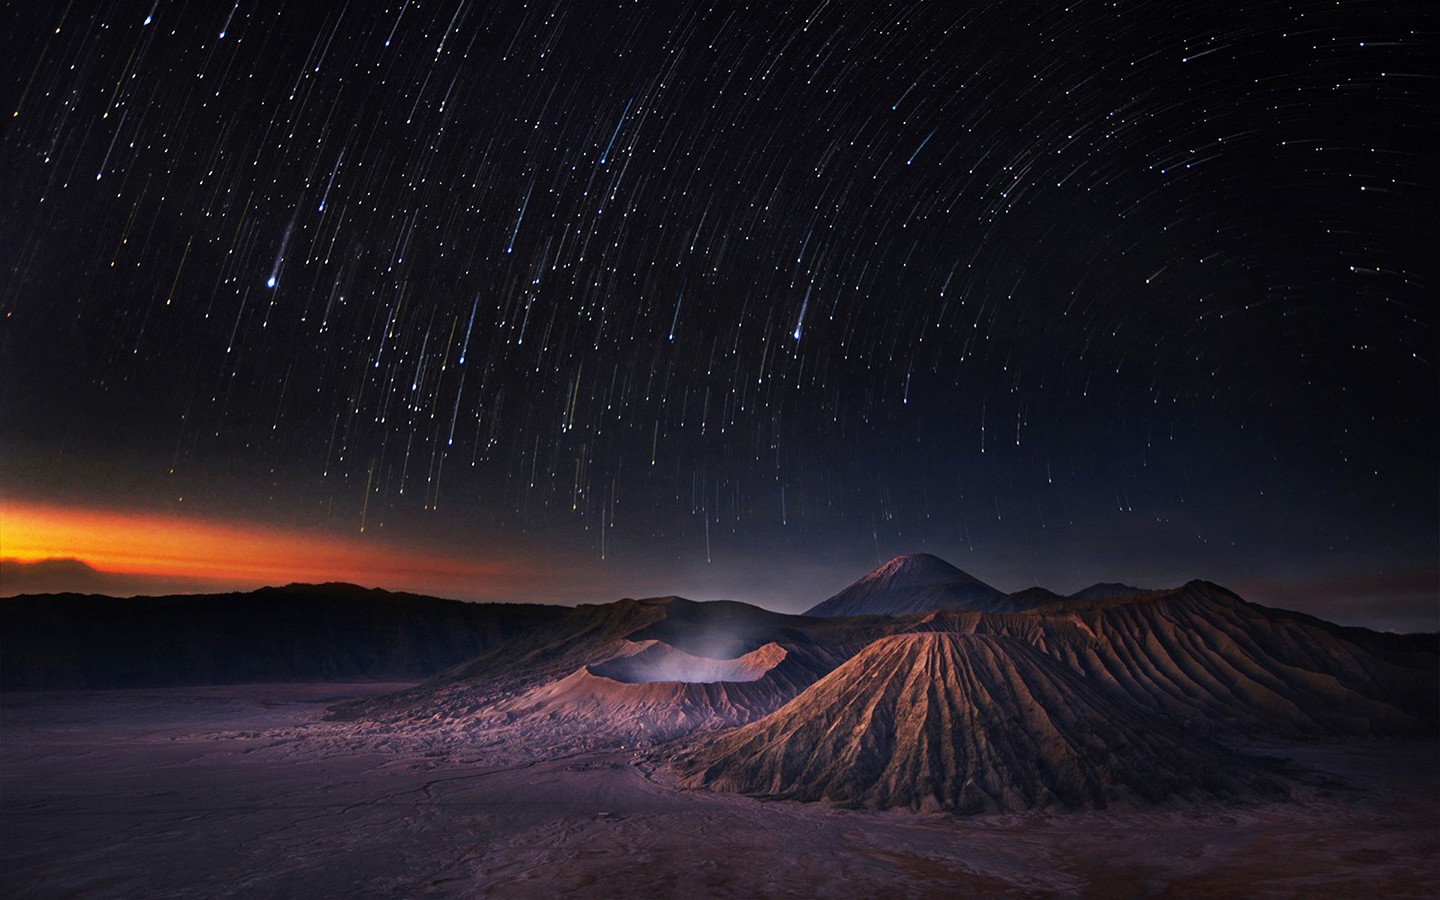 Landscape Mount Bromo Long Exposure Milky Way Crater Volcano Indonesia Star Trails 1440x900